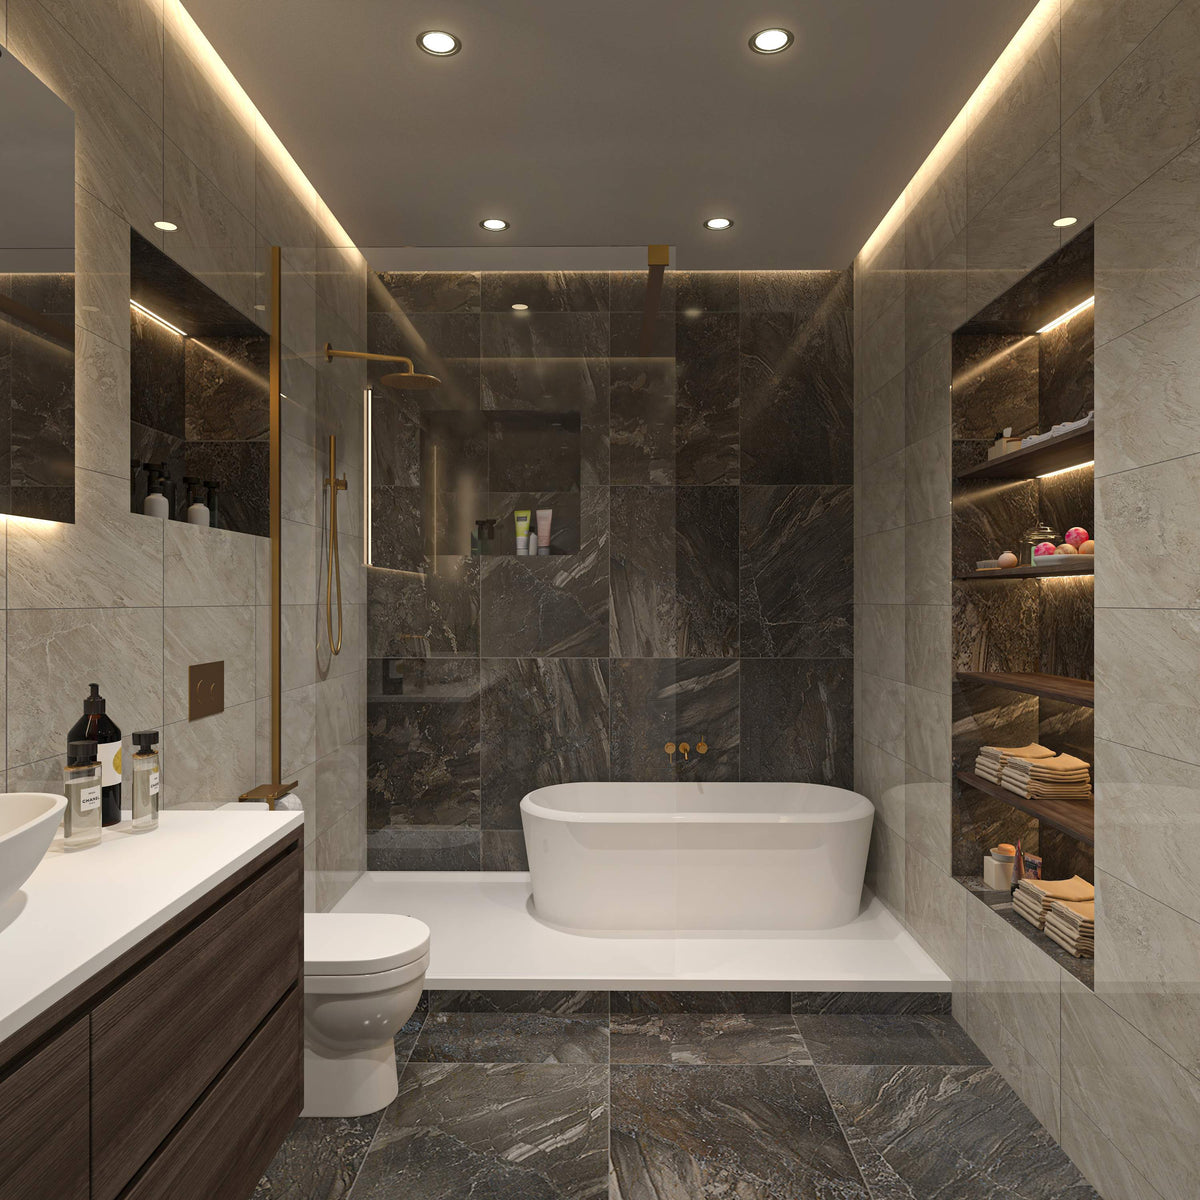 Bathroom example of natural white lighting